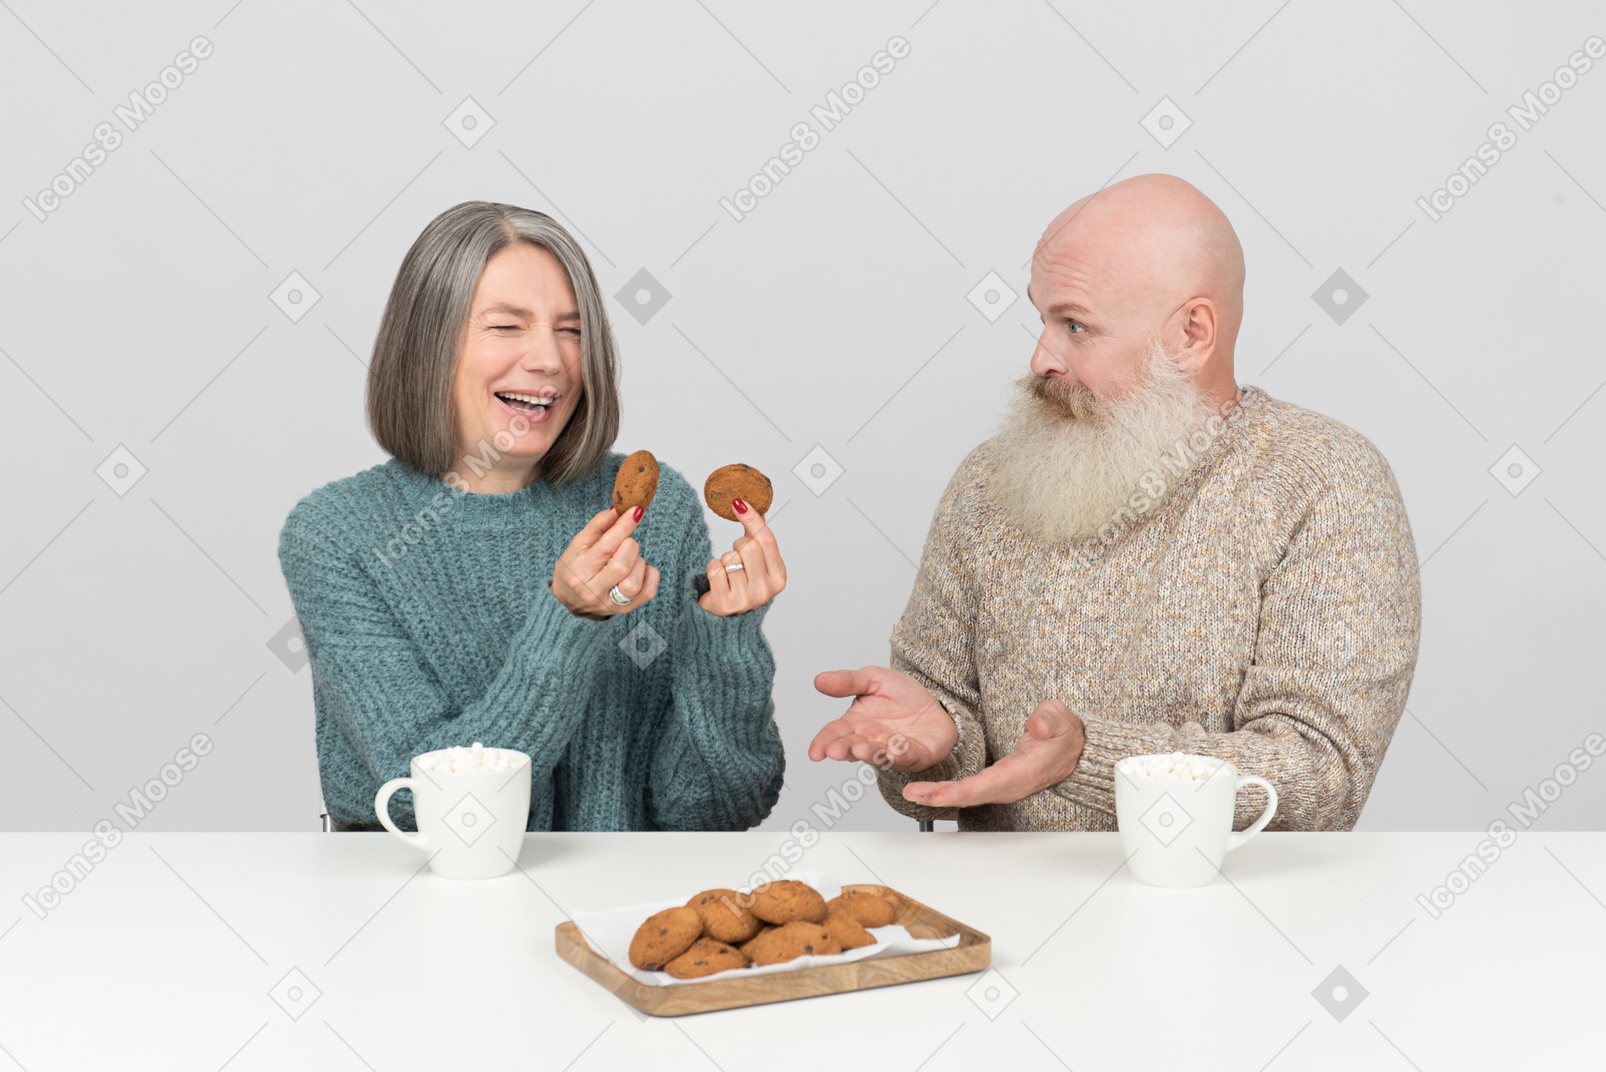 Aged woman laughing hard while holding cookies and her husband doesn't get it